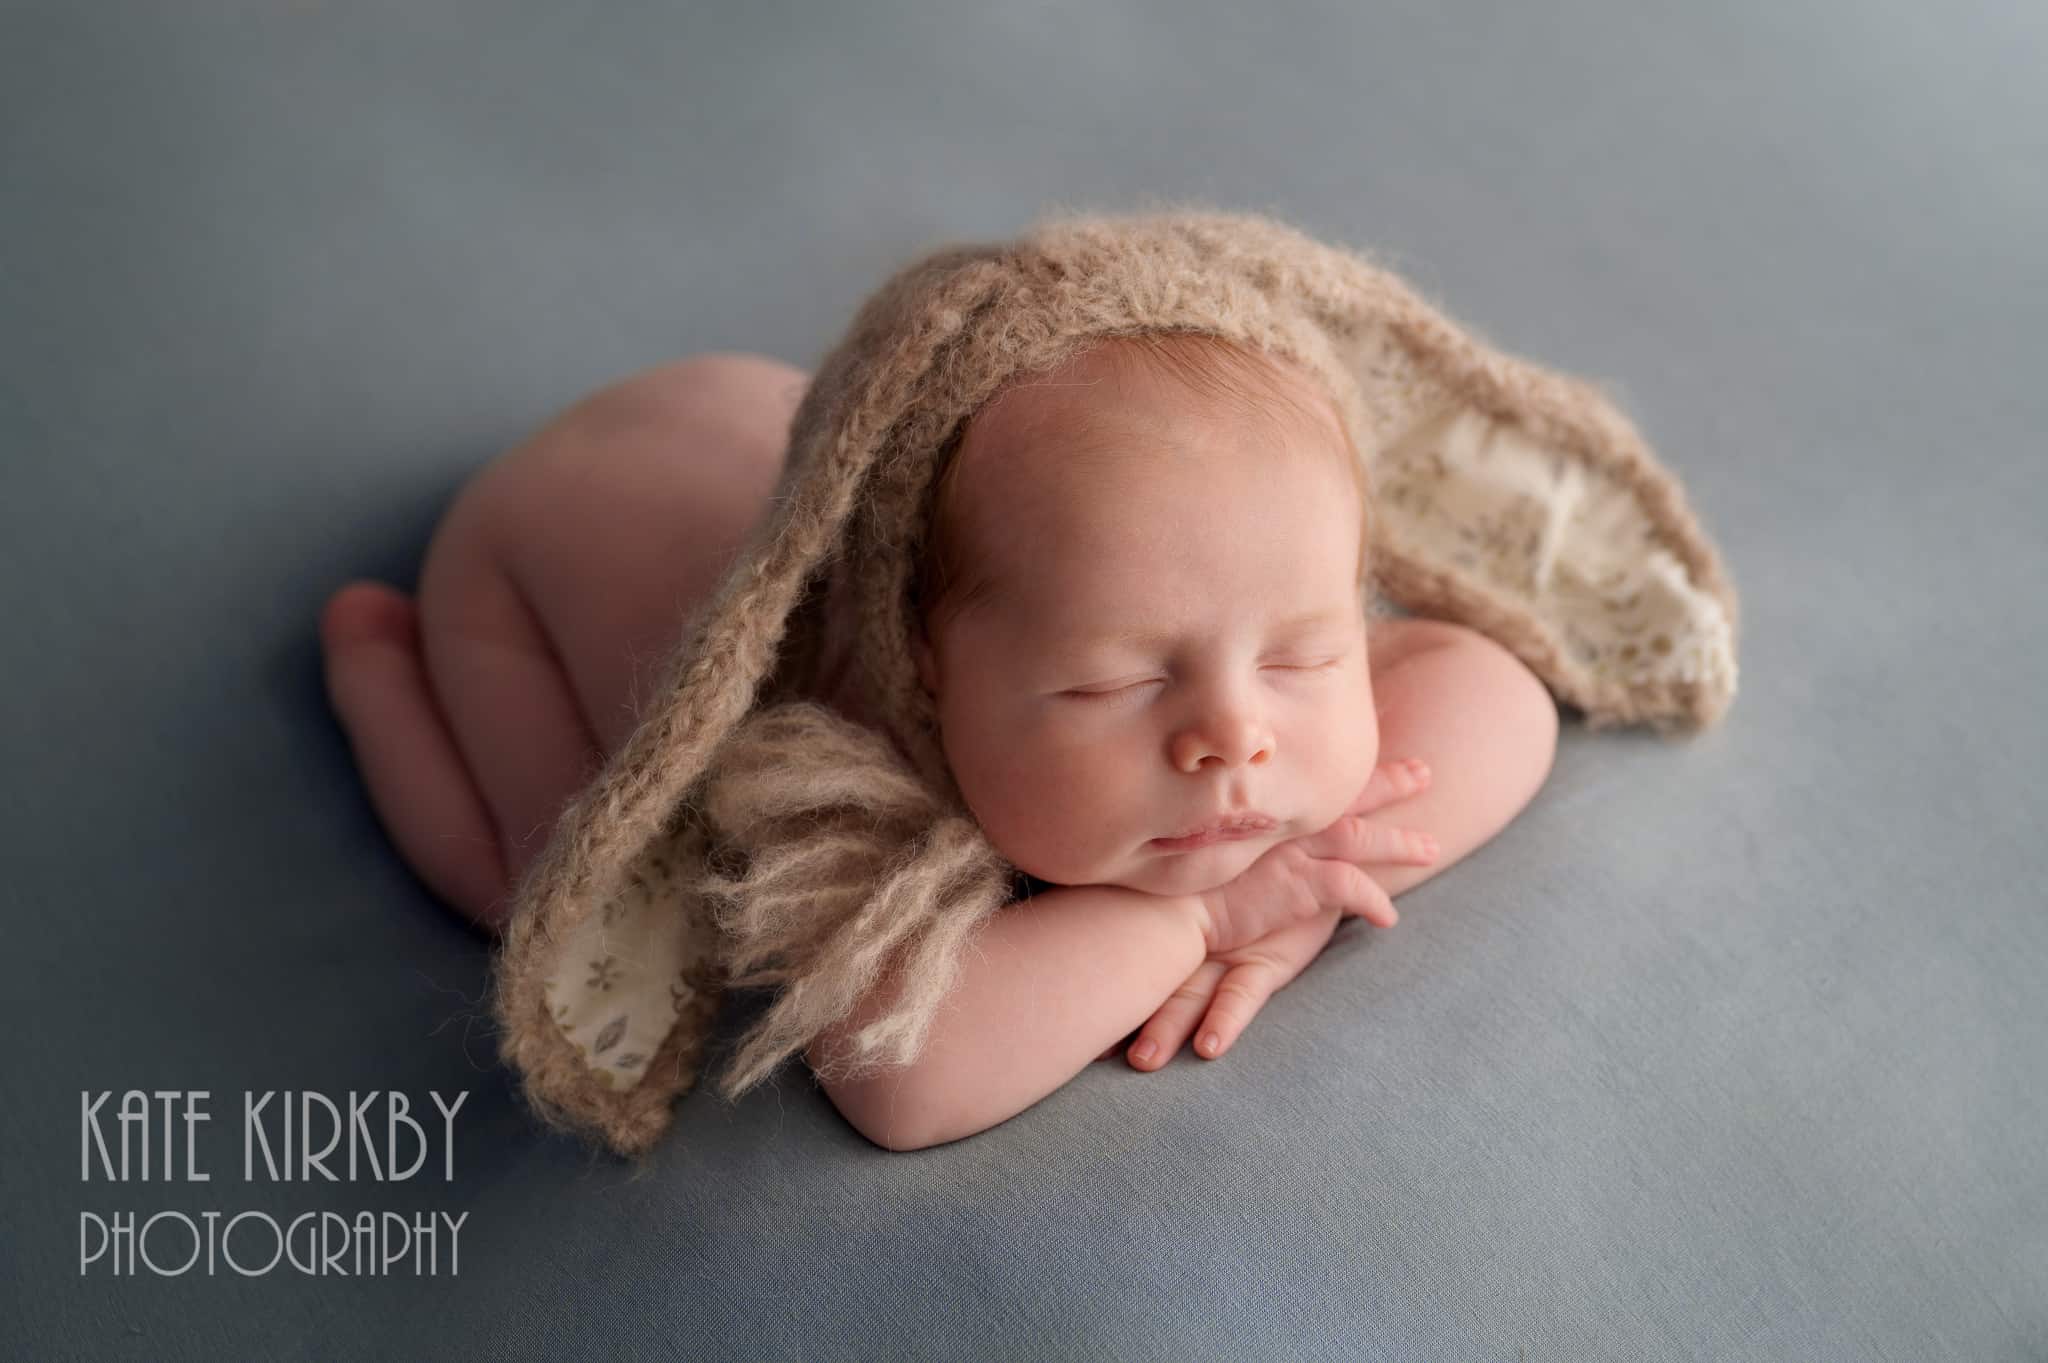 photo of newborn baby wearing an bunny hat with his head resting on his hands